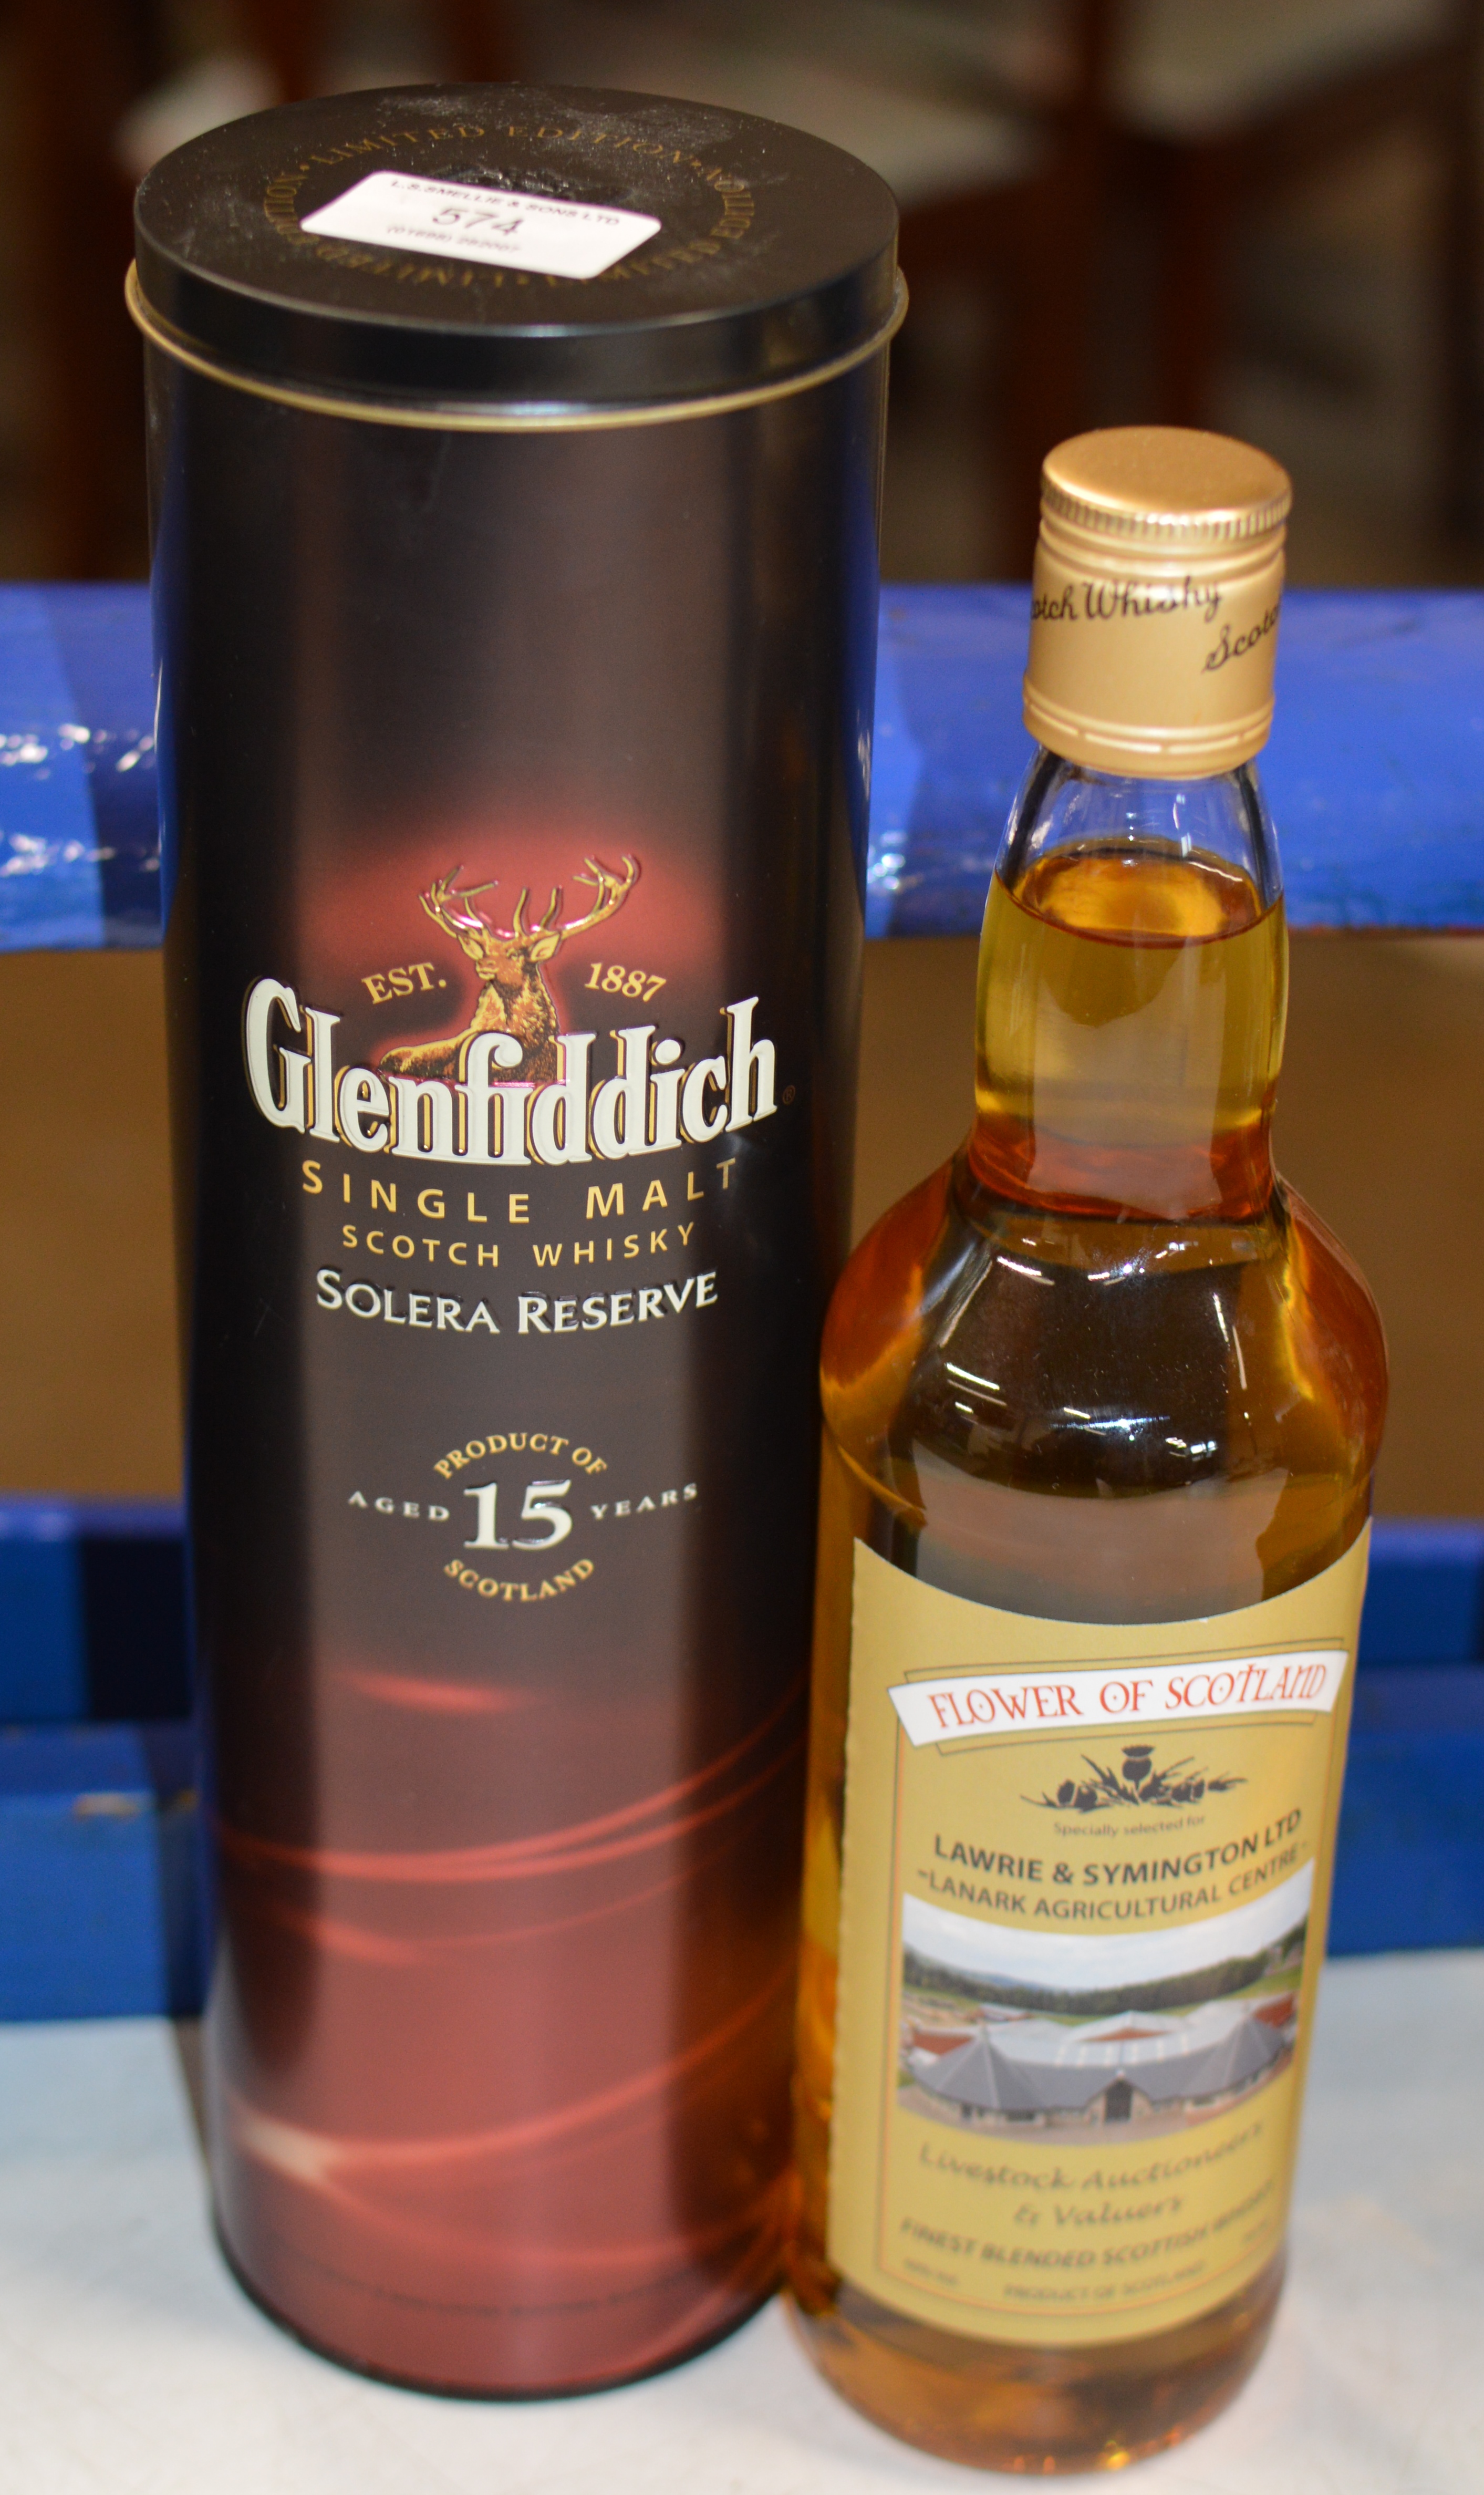 GLENFIDDICH AGED 15 YEARS WITH PRESENTATION BOX - 70CL, 40% VOL & FLOWER OF SCOTLAND, LAWRIE &